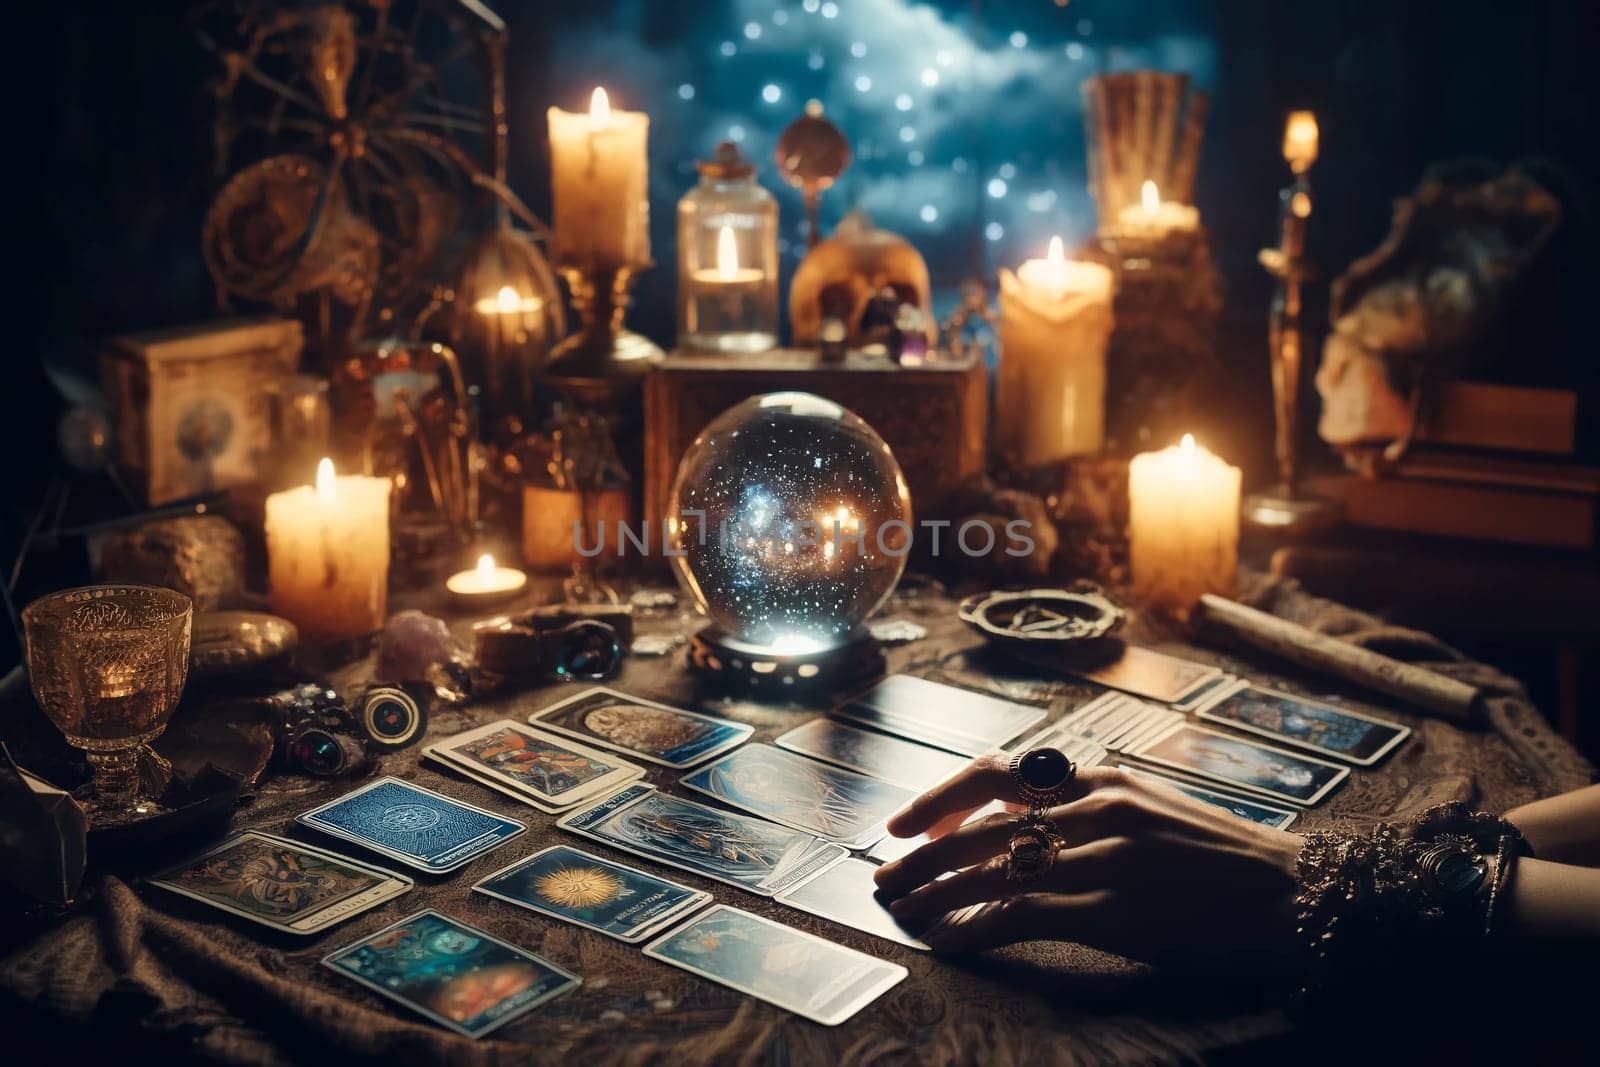 Fortune telling with Tarot cards in a mystical setting with burning candles by Annado